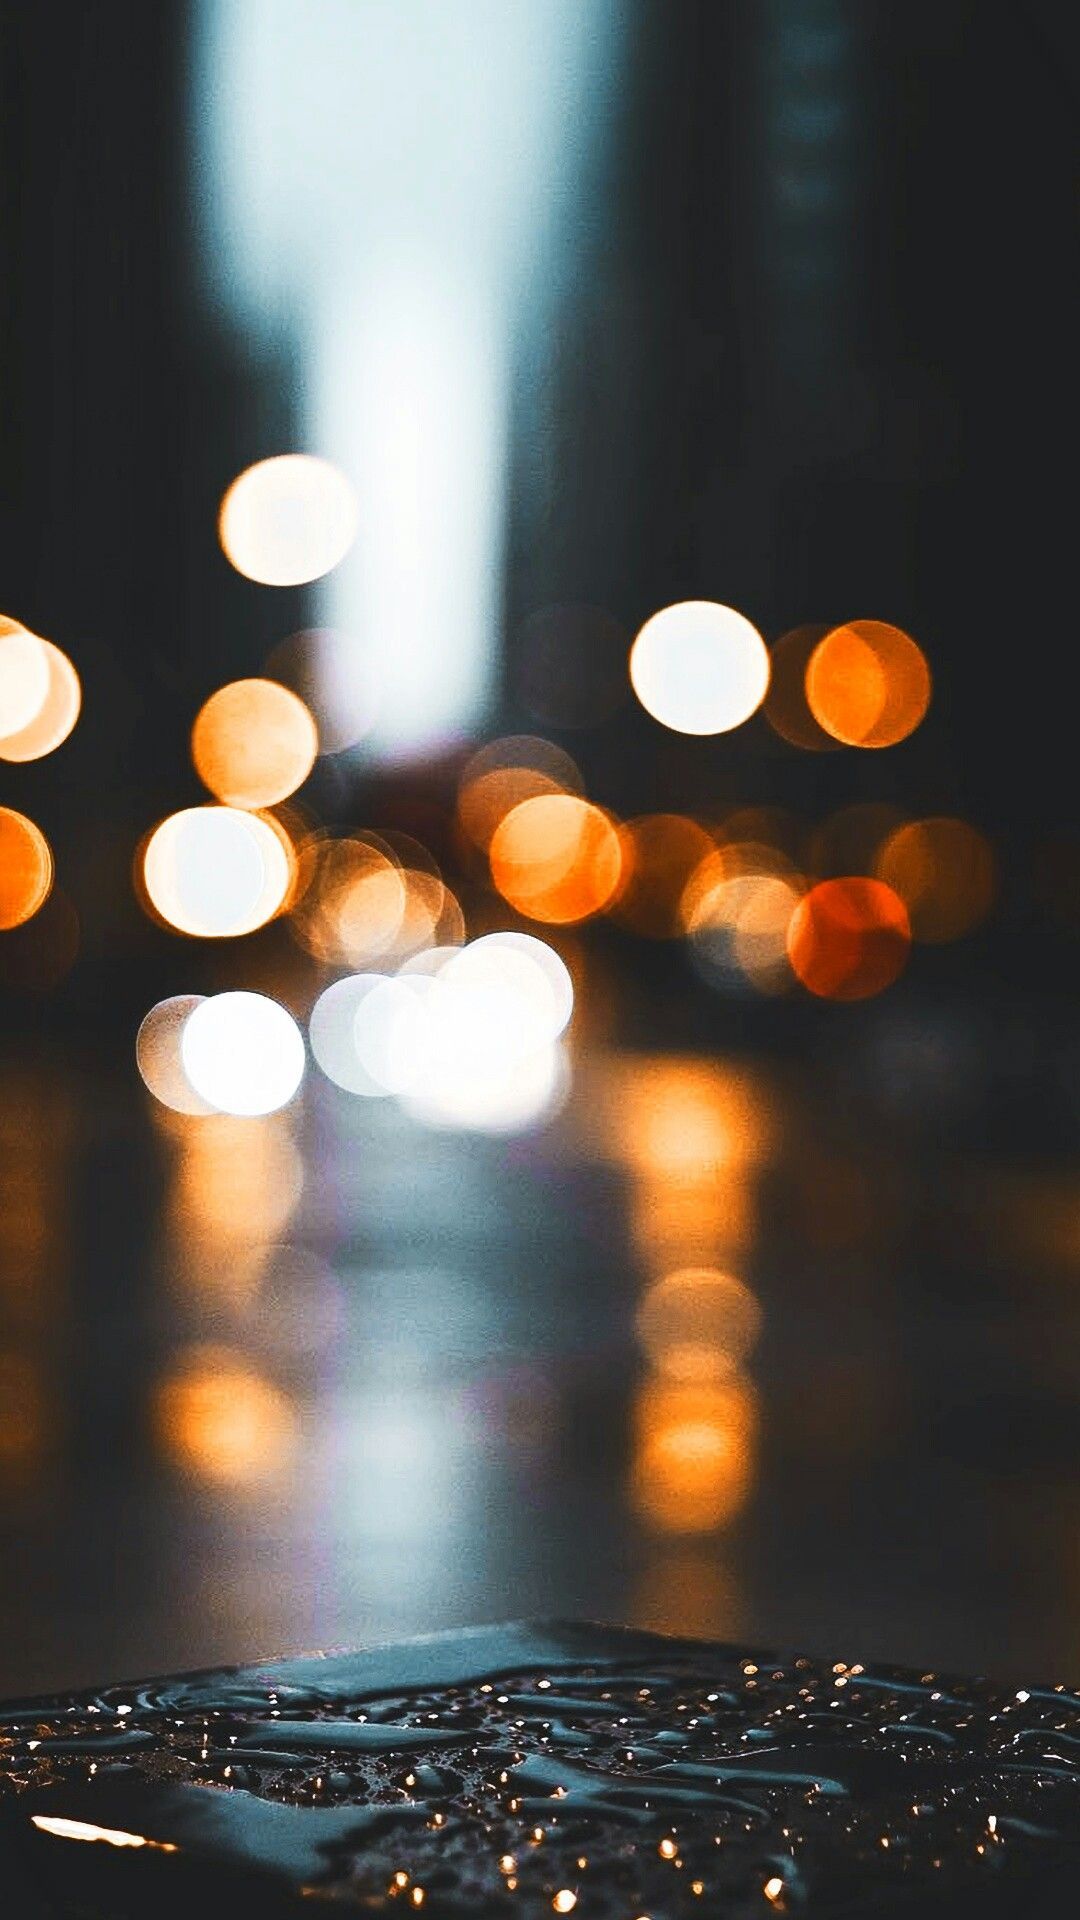 Blurry Aesthetic Pictures Wallpapers